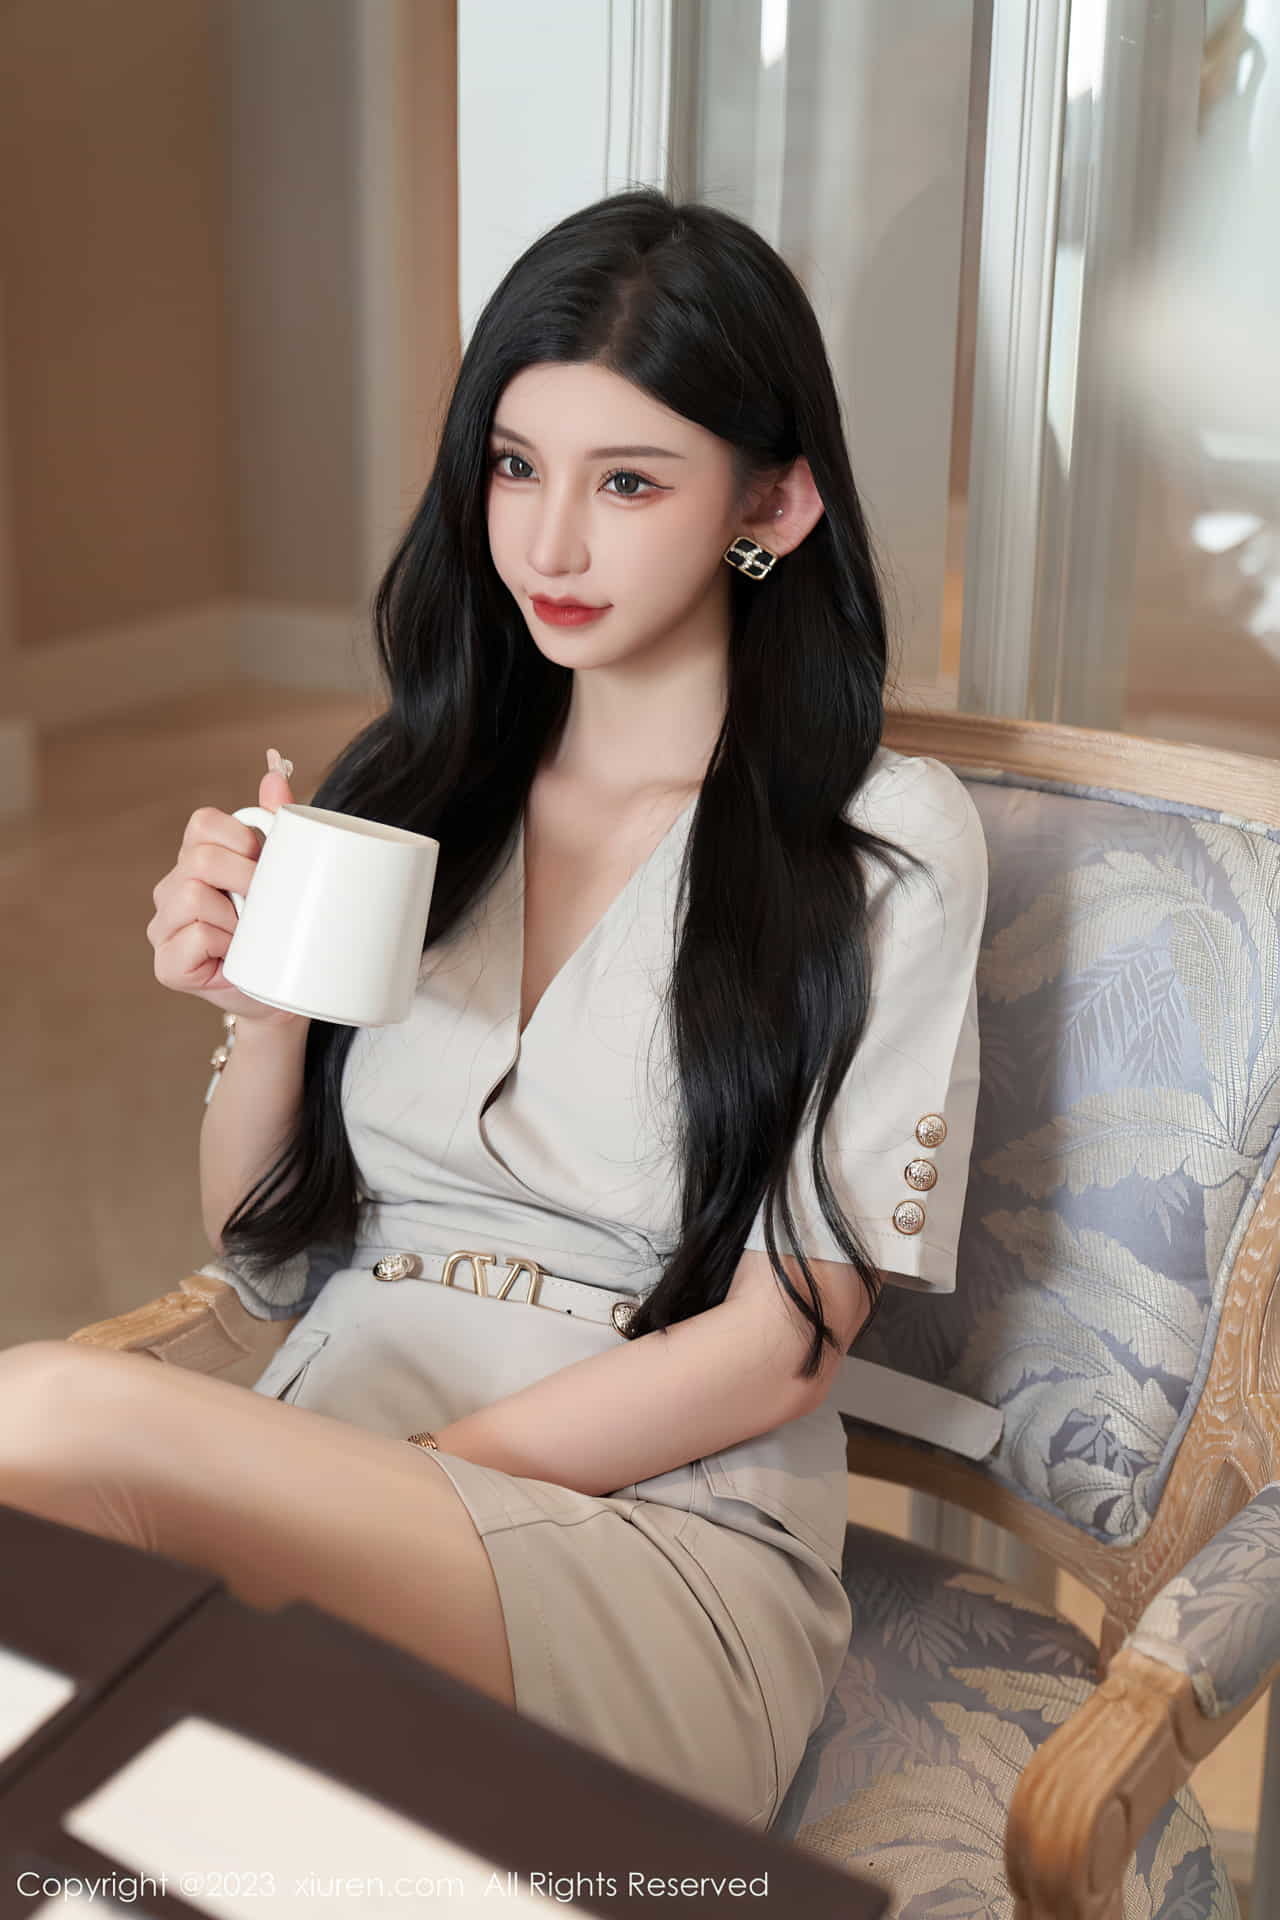 Personally customized goddess Zhou Yuxi theme "The Loneliness of a Female Lawyer" story content with her